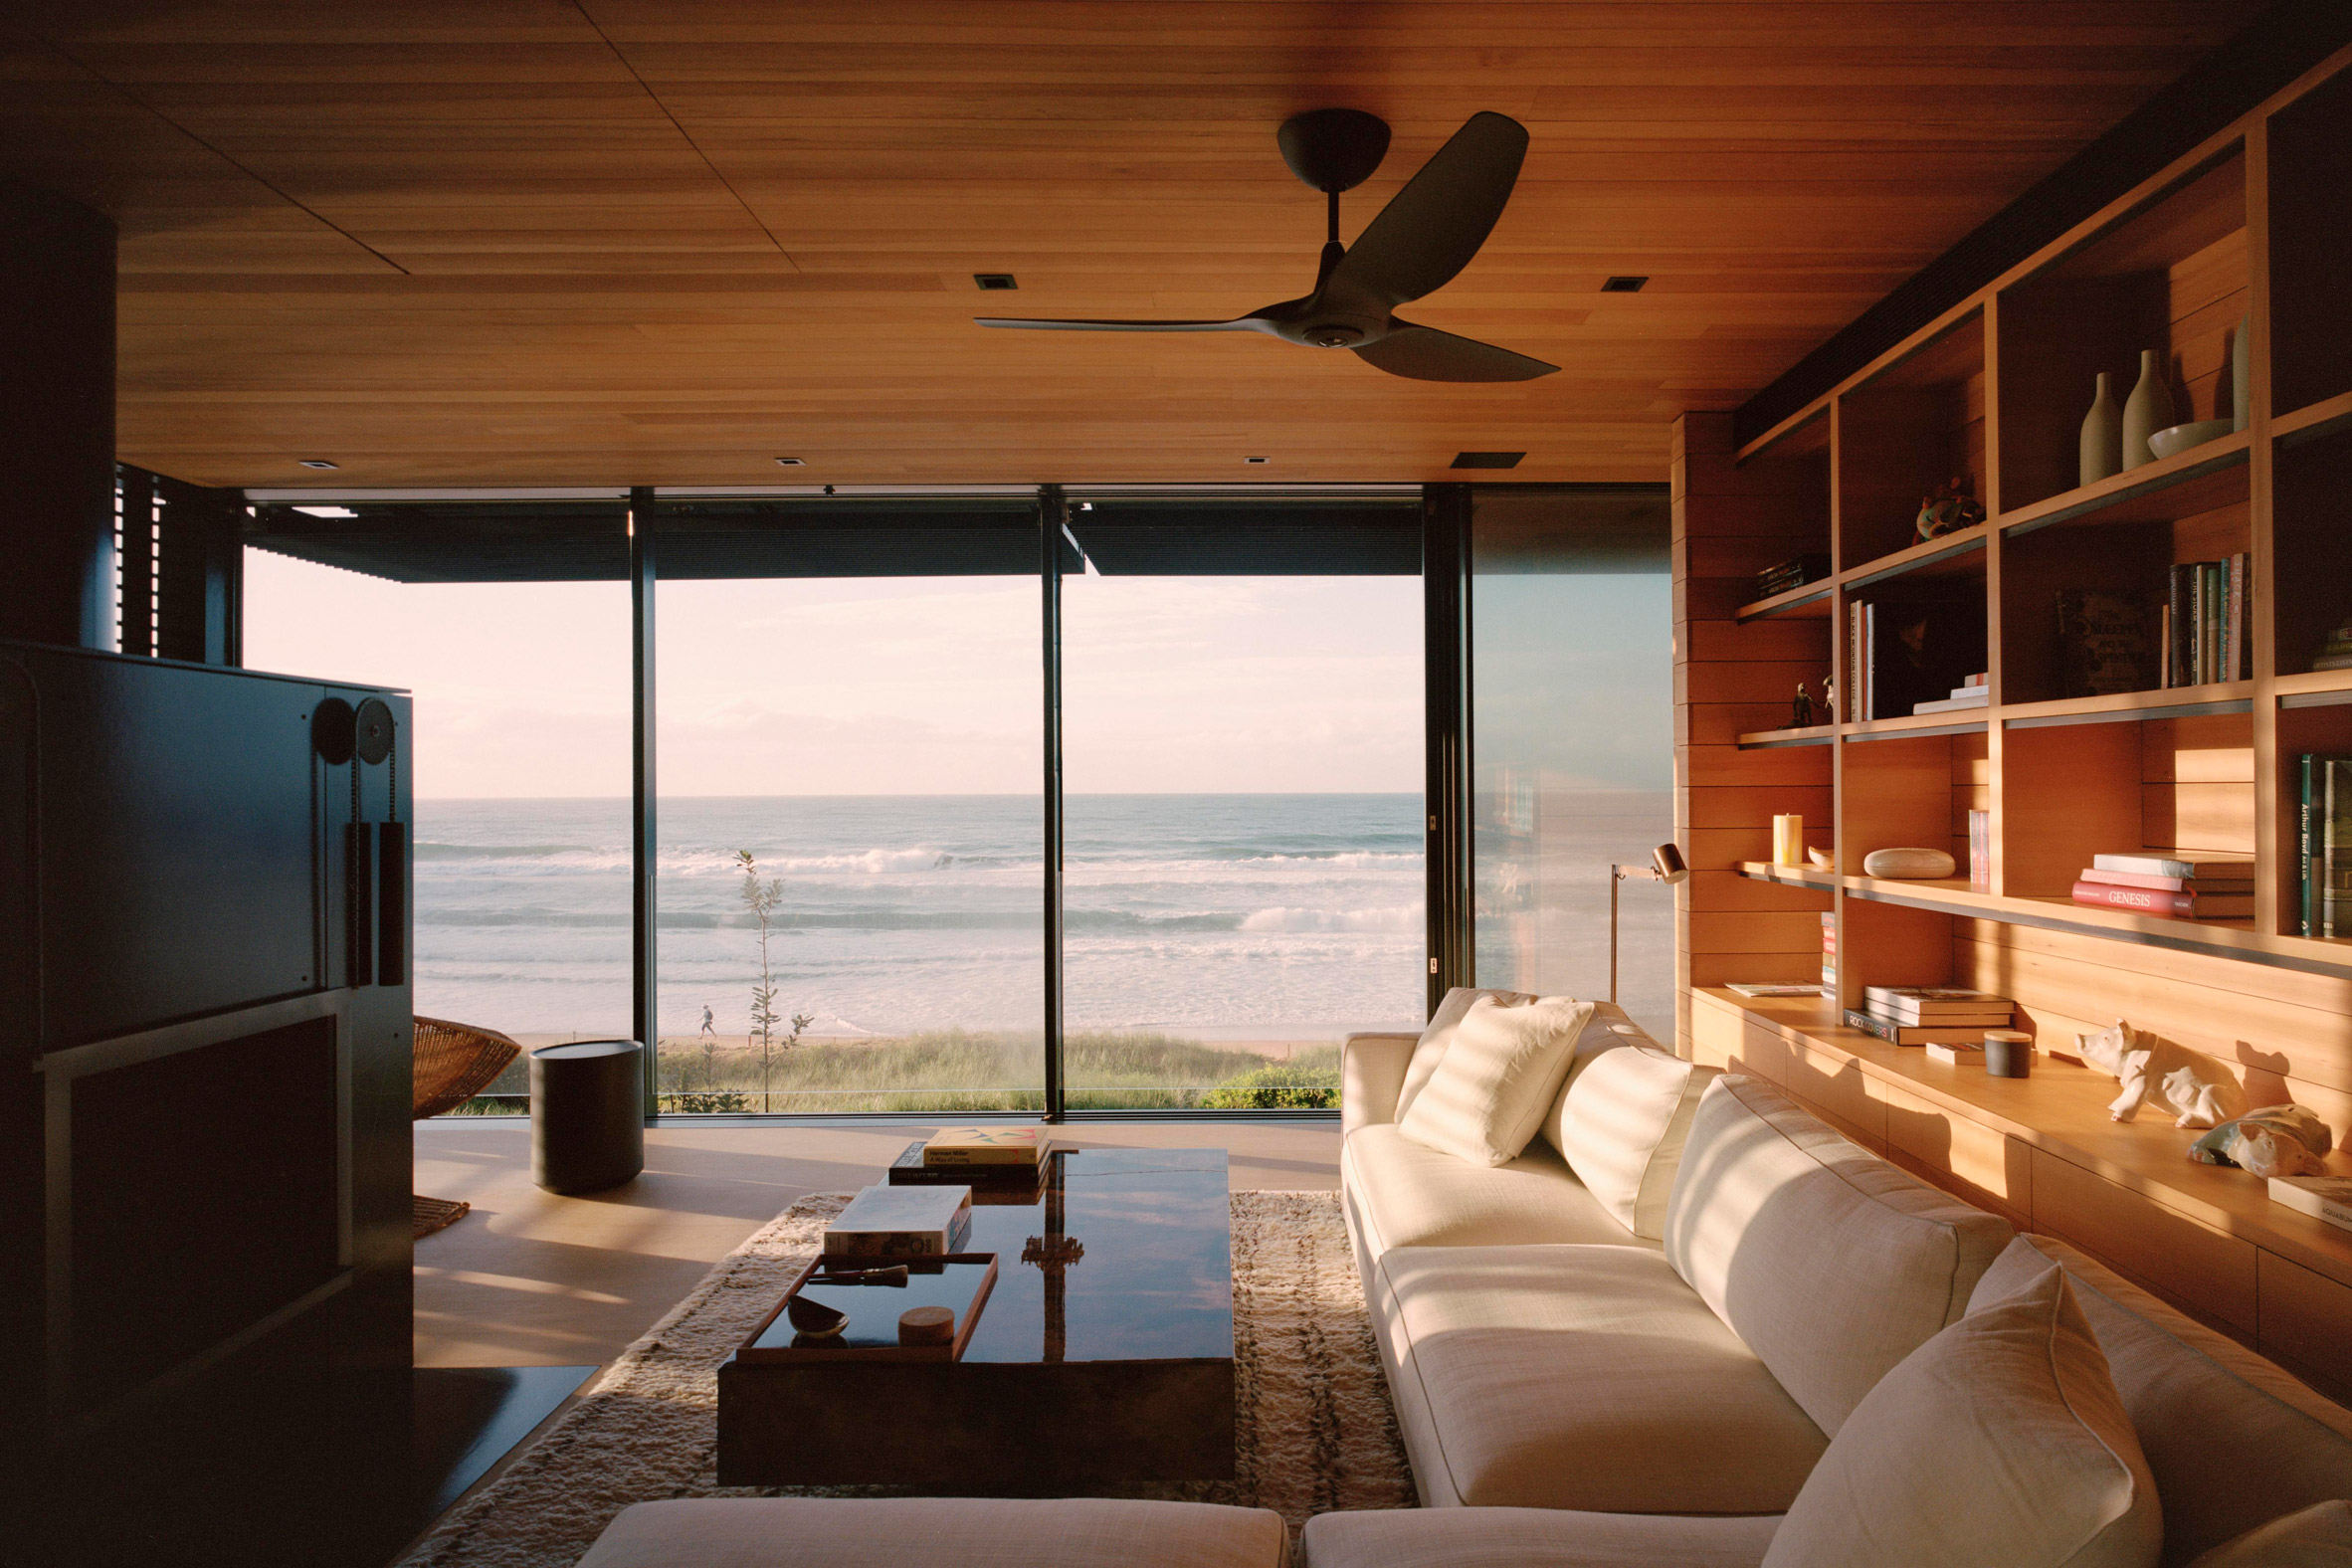 The living area has wooden interiors and a seafront view